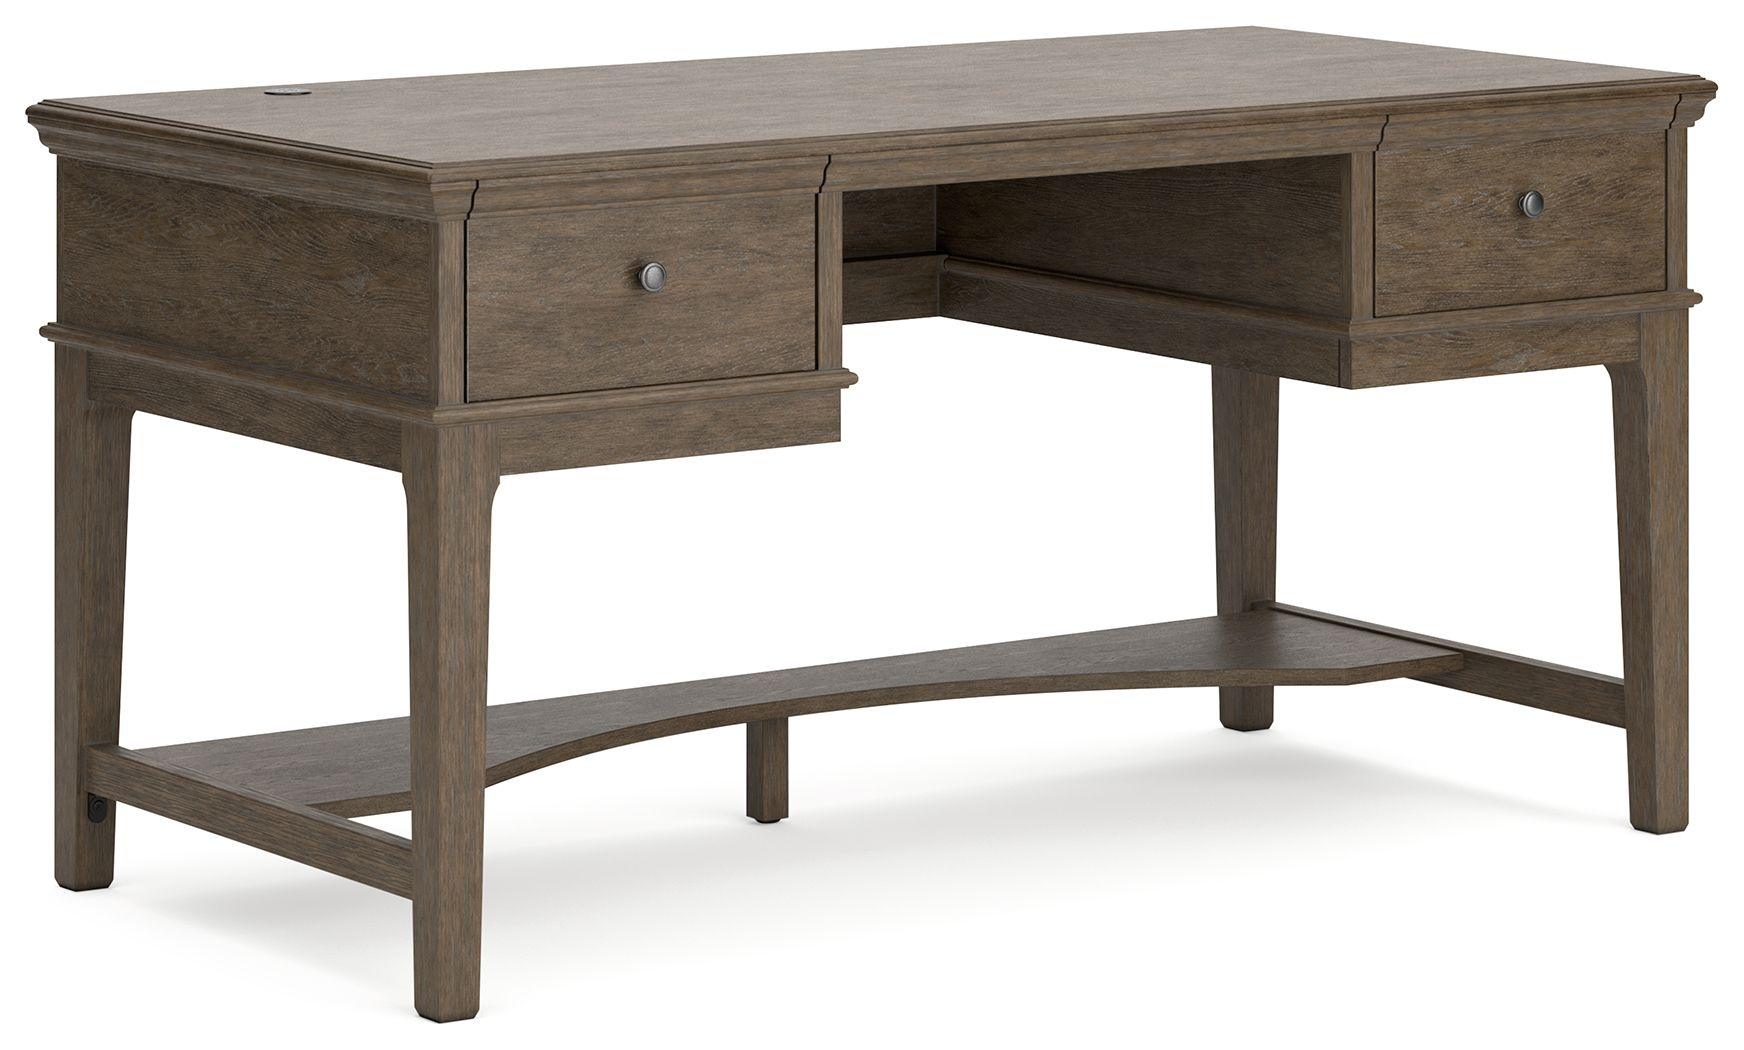 Signature Design by Ashley® - Janismore - Weathered Gray - Home Office Storage Leg Desk - 5th Avenue Furniture